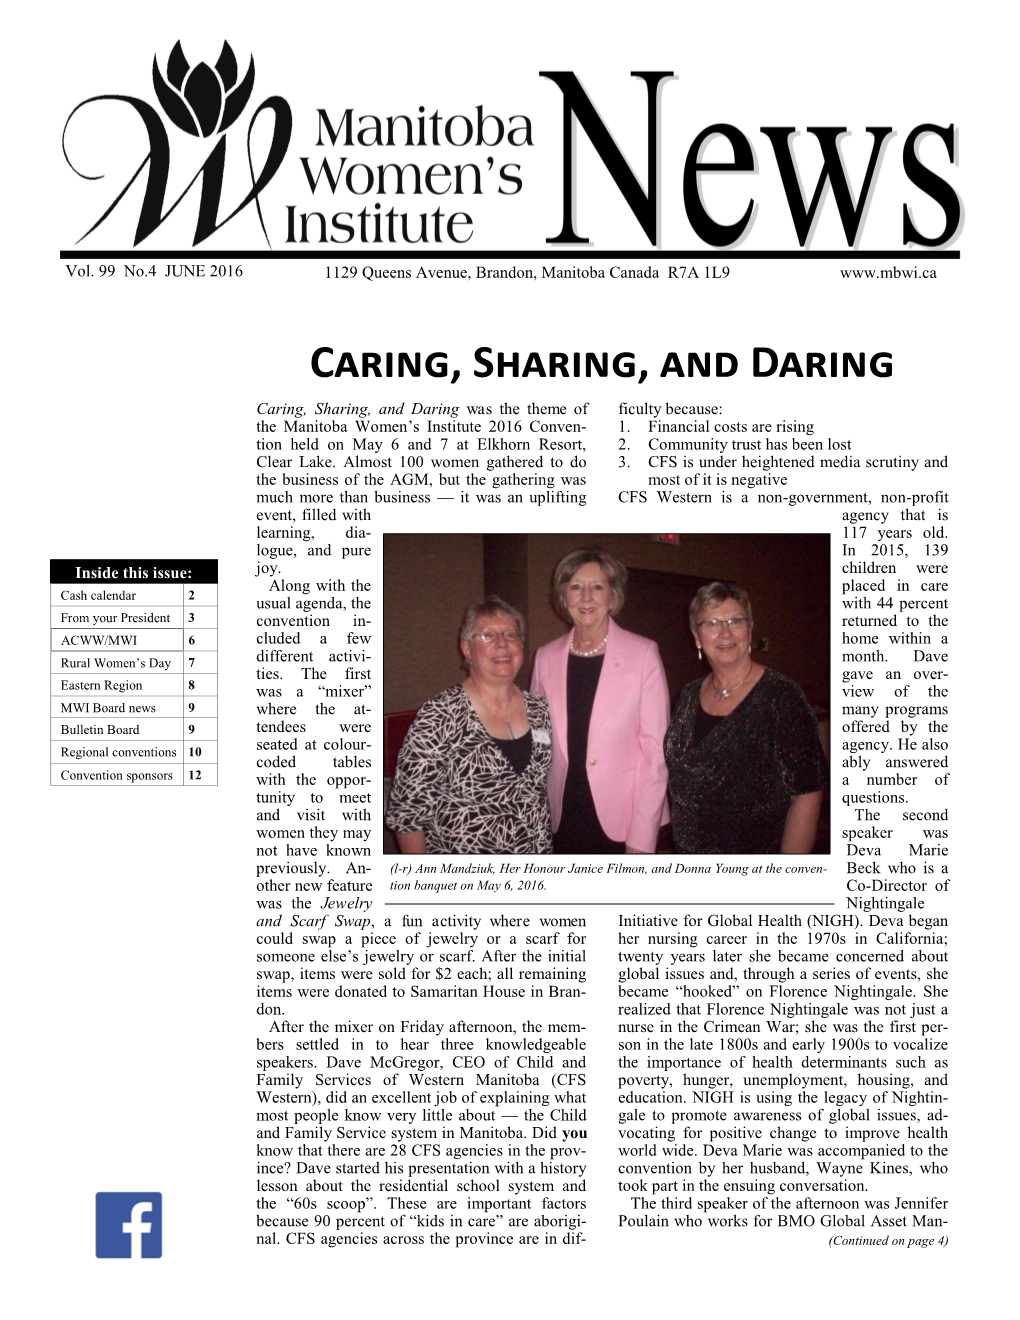 Caring, Sharing, and Daring Caring, Sharing, and Daring Was the Theme of Ficulty Because: the Manitoba Women’S Institute 2016 Conven- 1